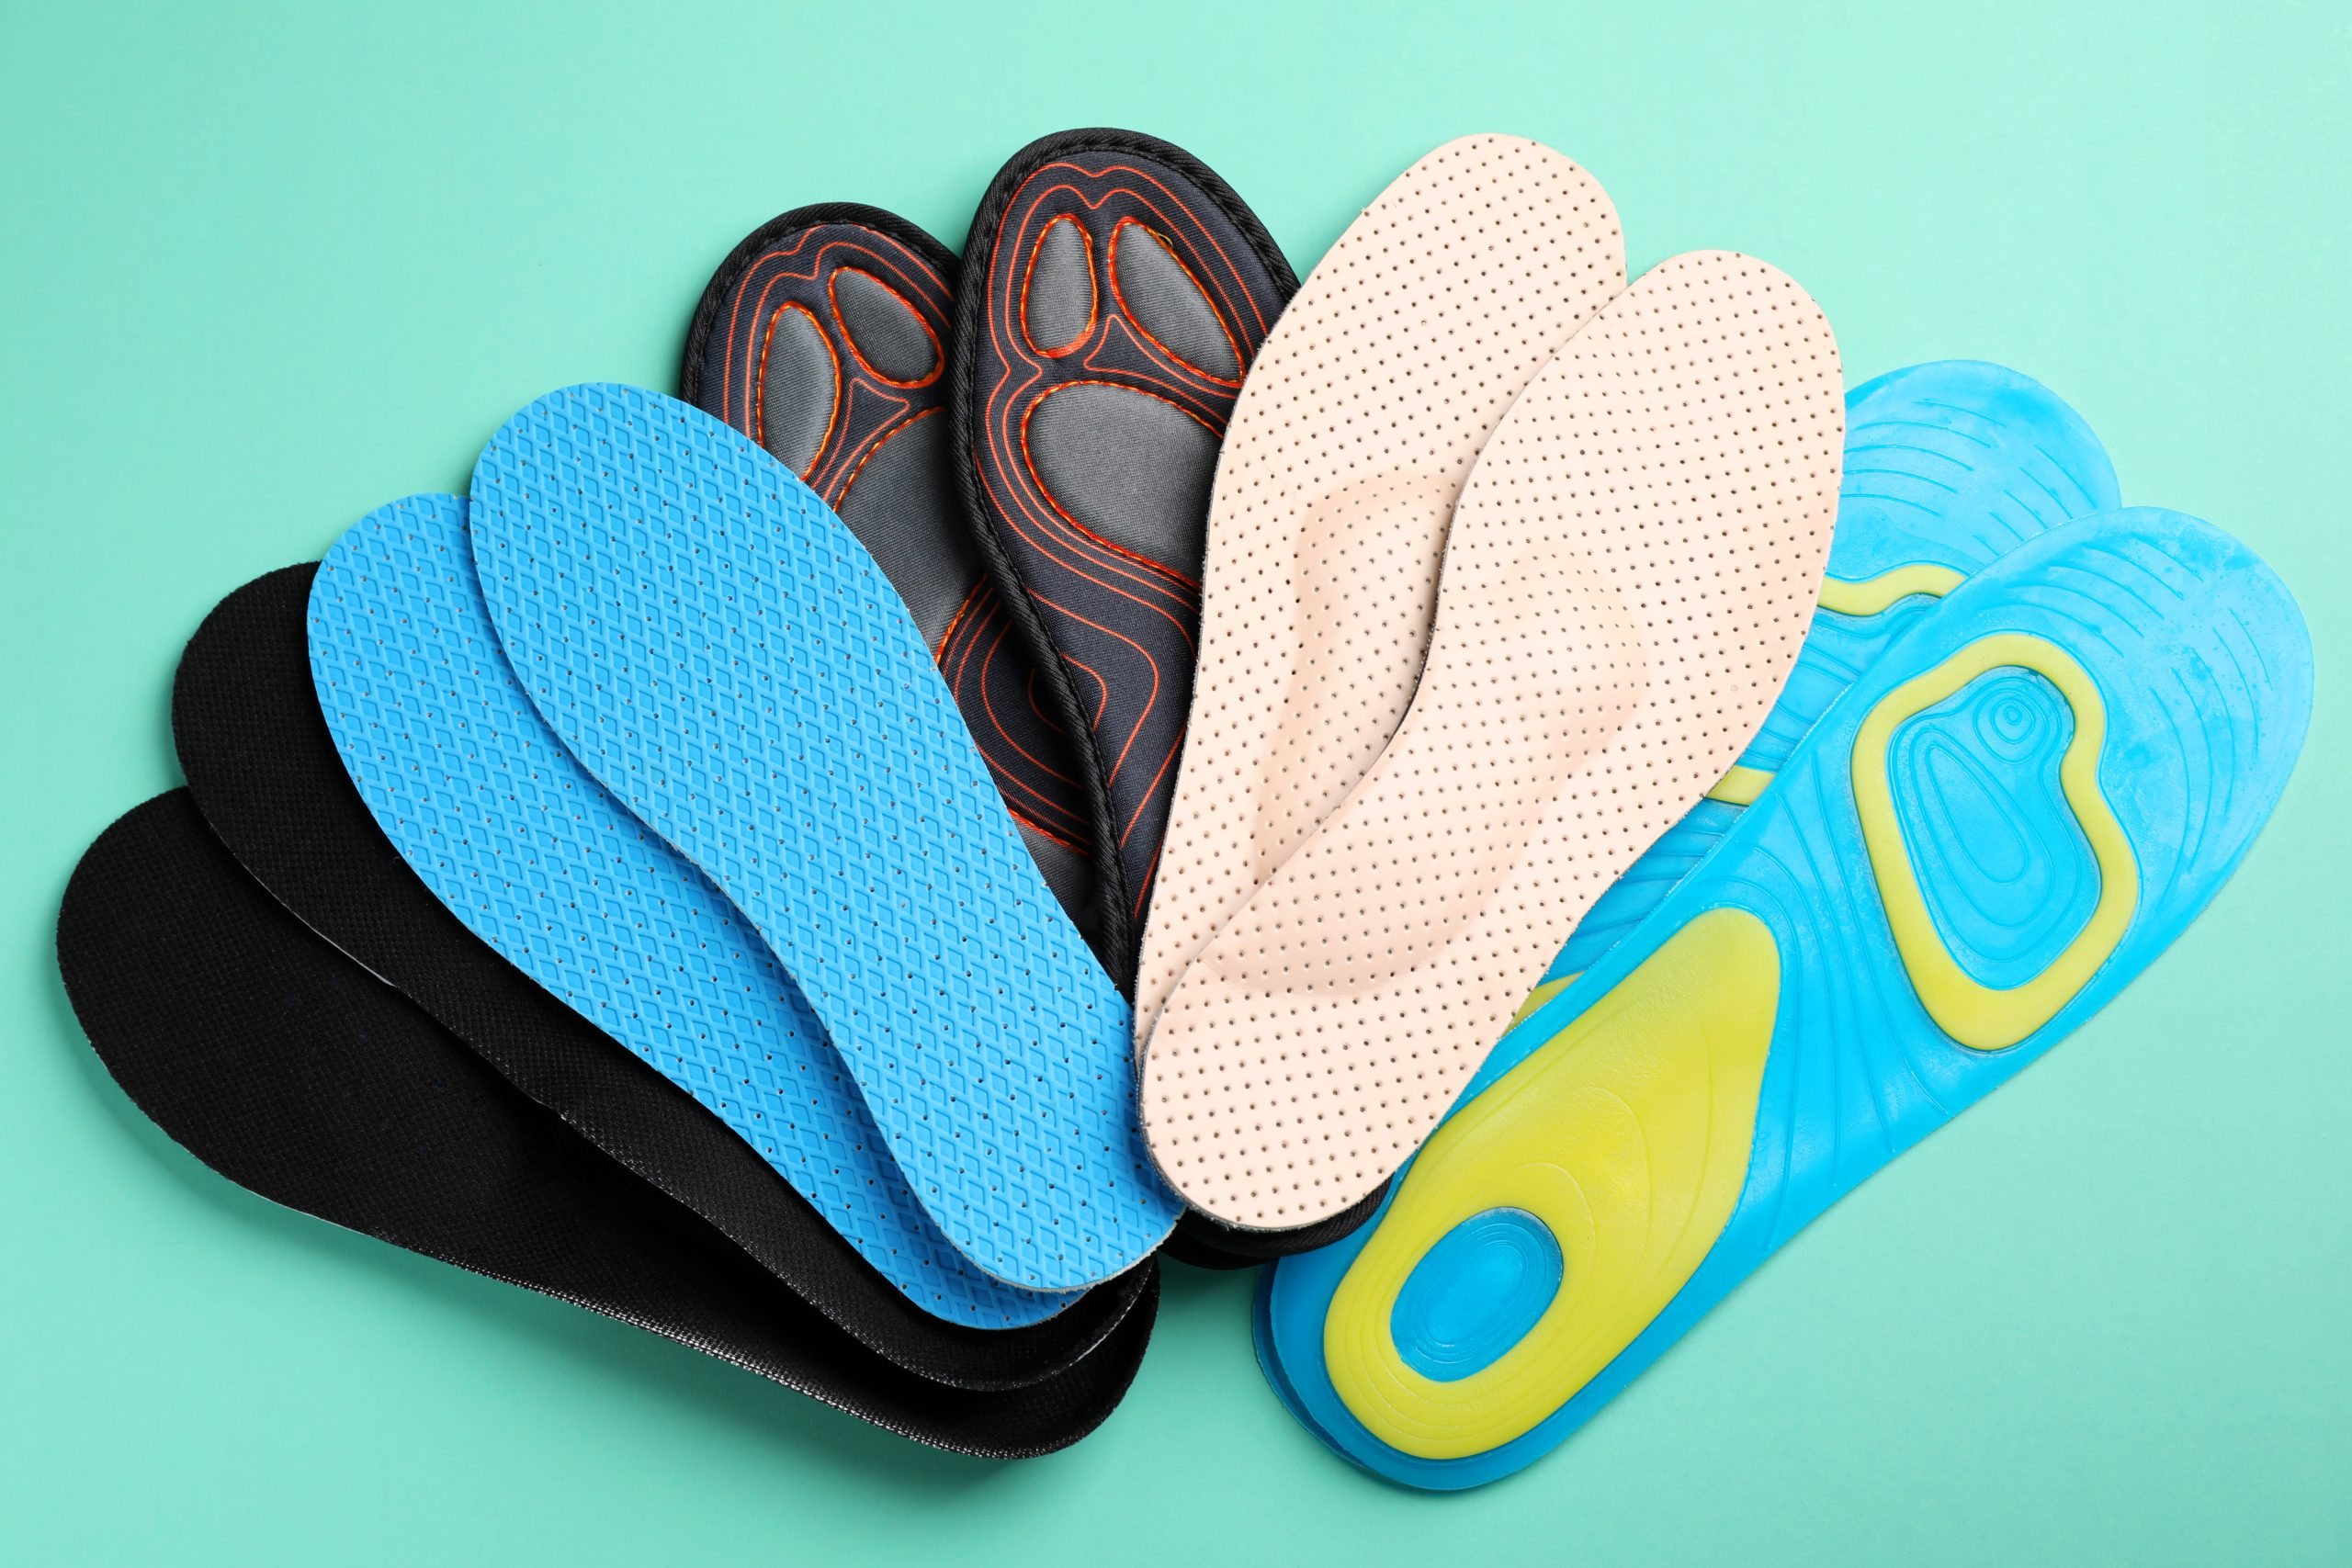 Assorted orthotic inserts to give extra comfort and support. Read this blog to discover the top 7 shoes for orthotics.